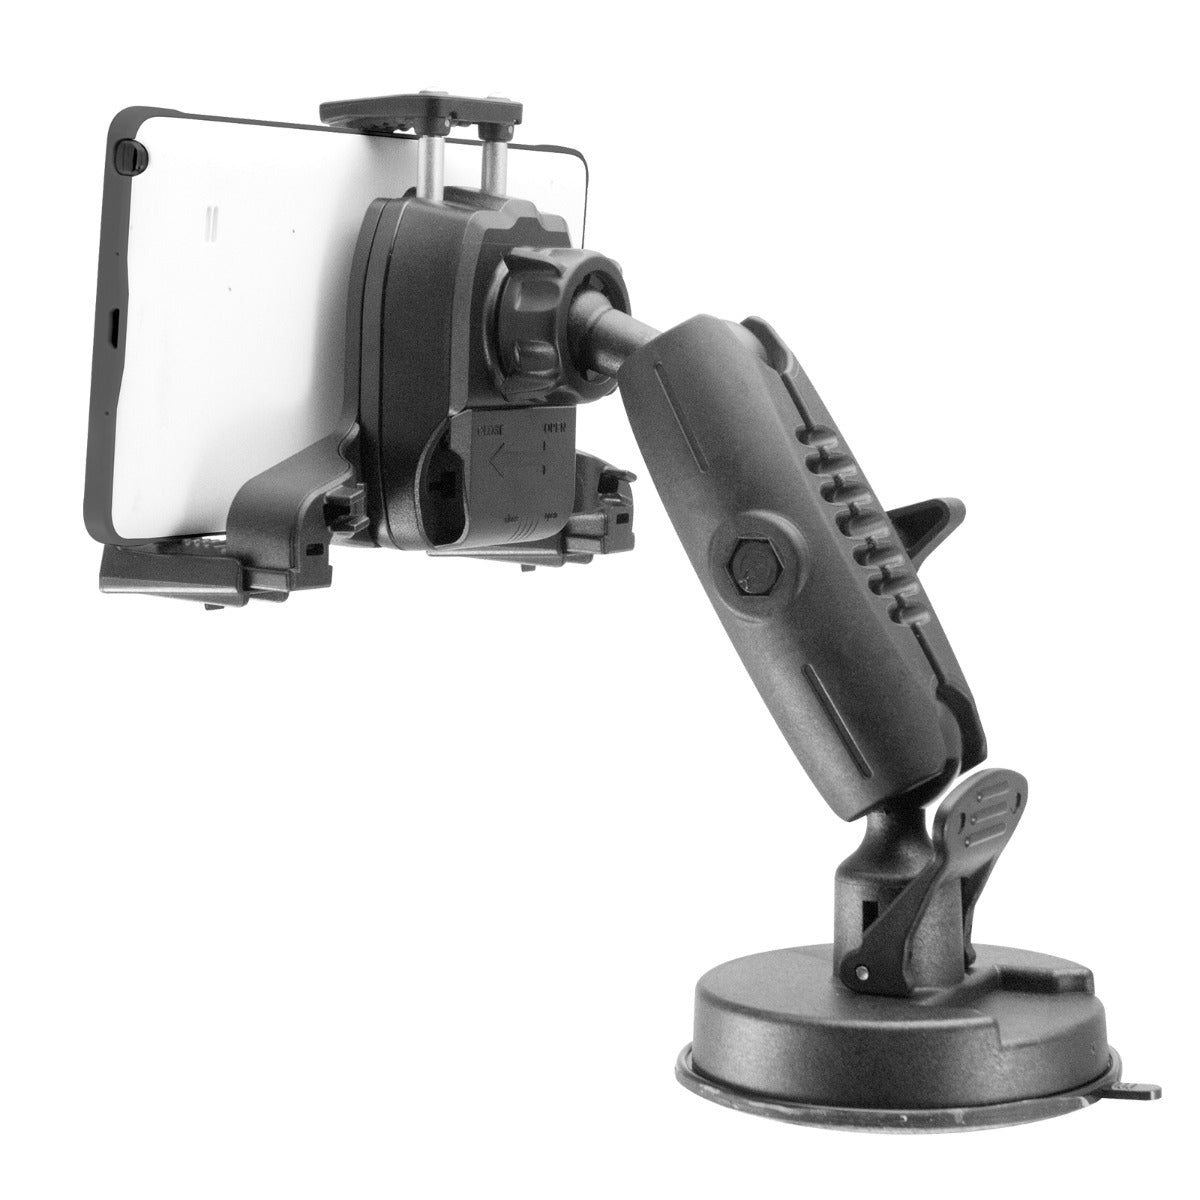 iBOLT xProDock™ NFC Bizmount™ - Phone Holder/Mount with Heavy Duty Suction Cup Base and 1.5m USB-C Cable